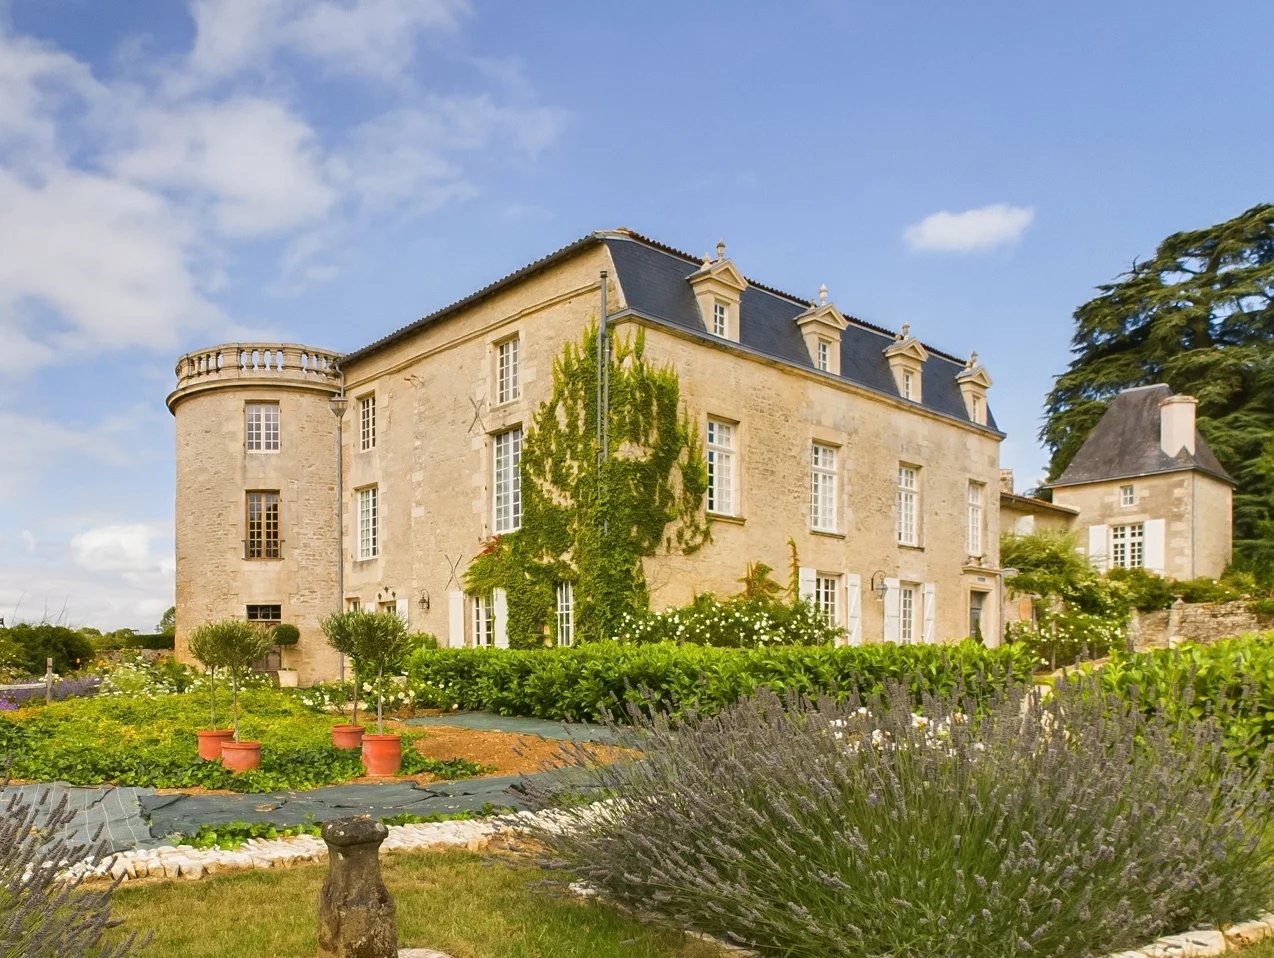 Superb fully restored 14th century château with stunning interiors